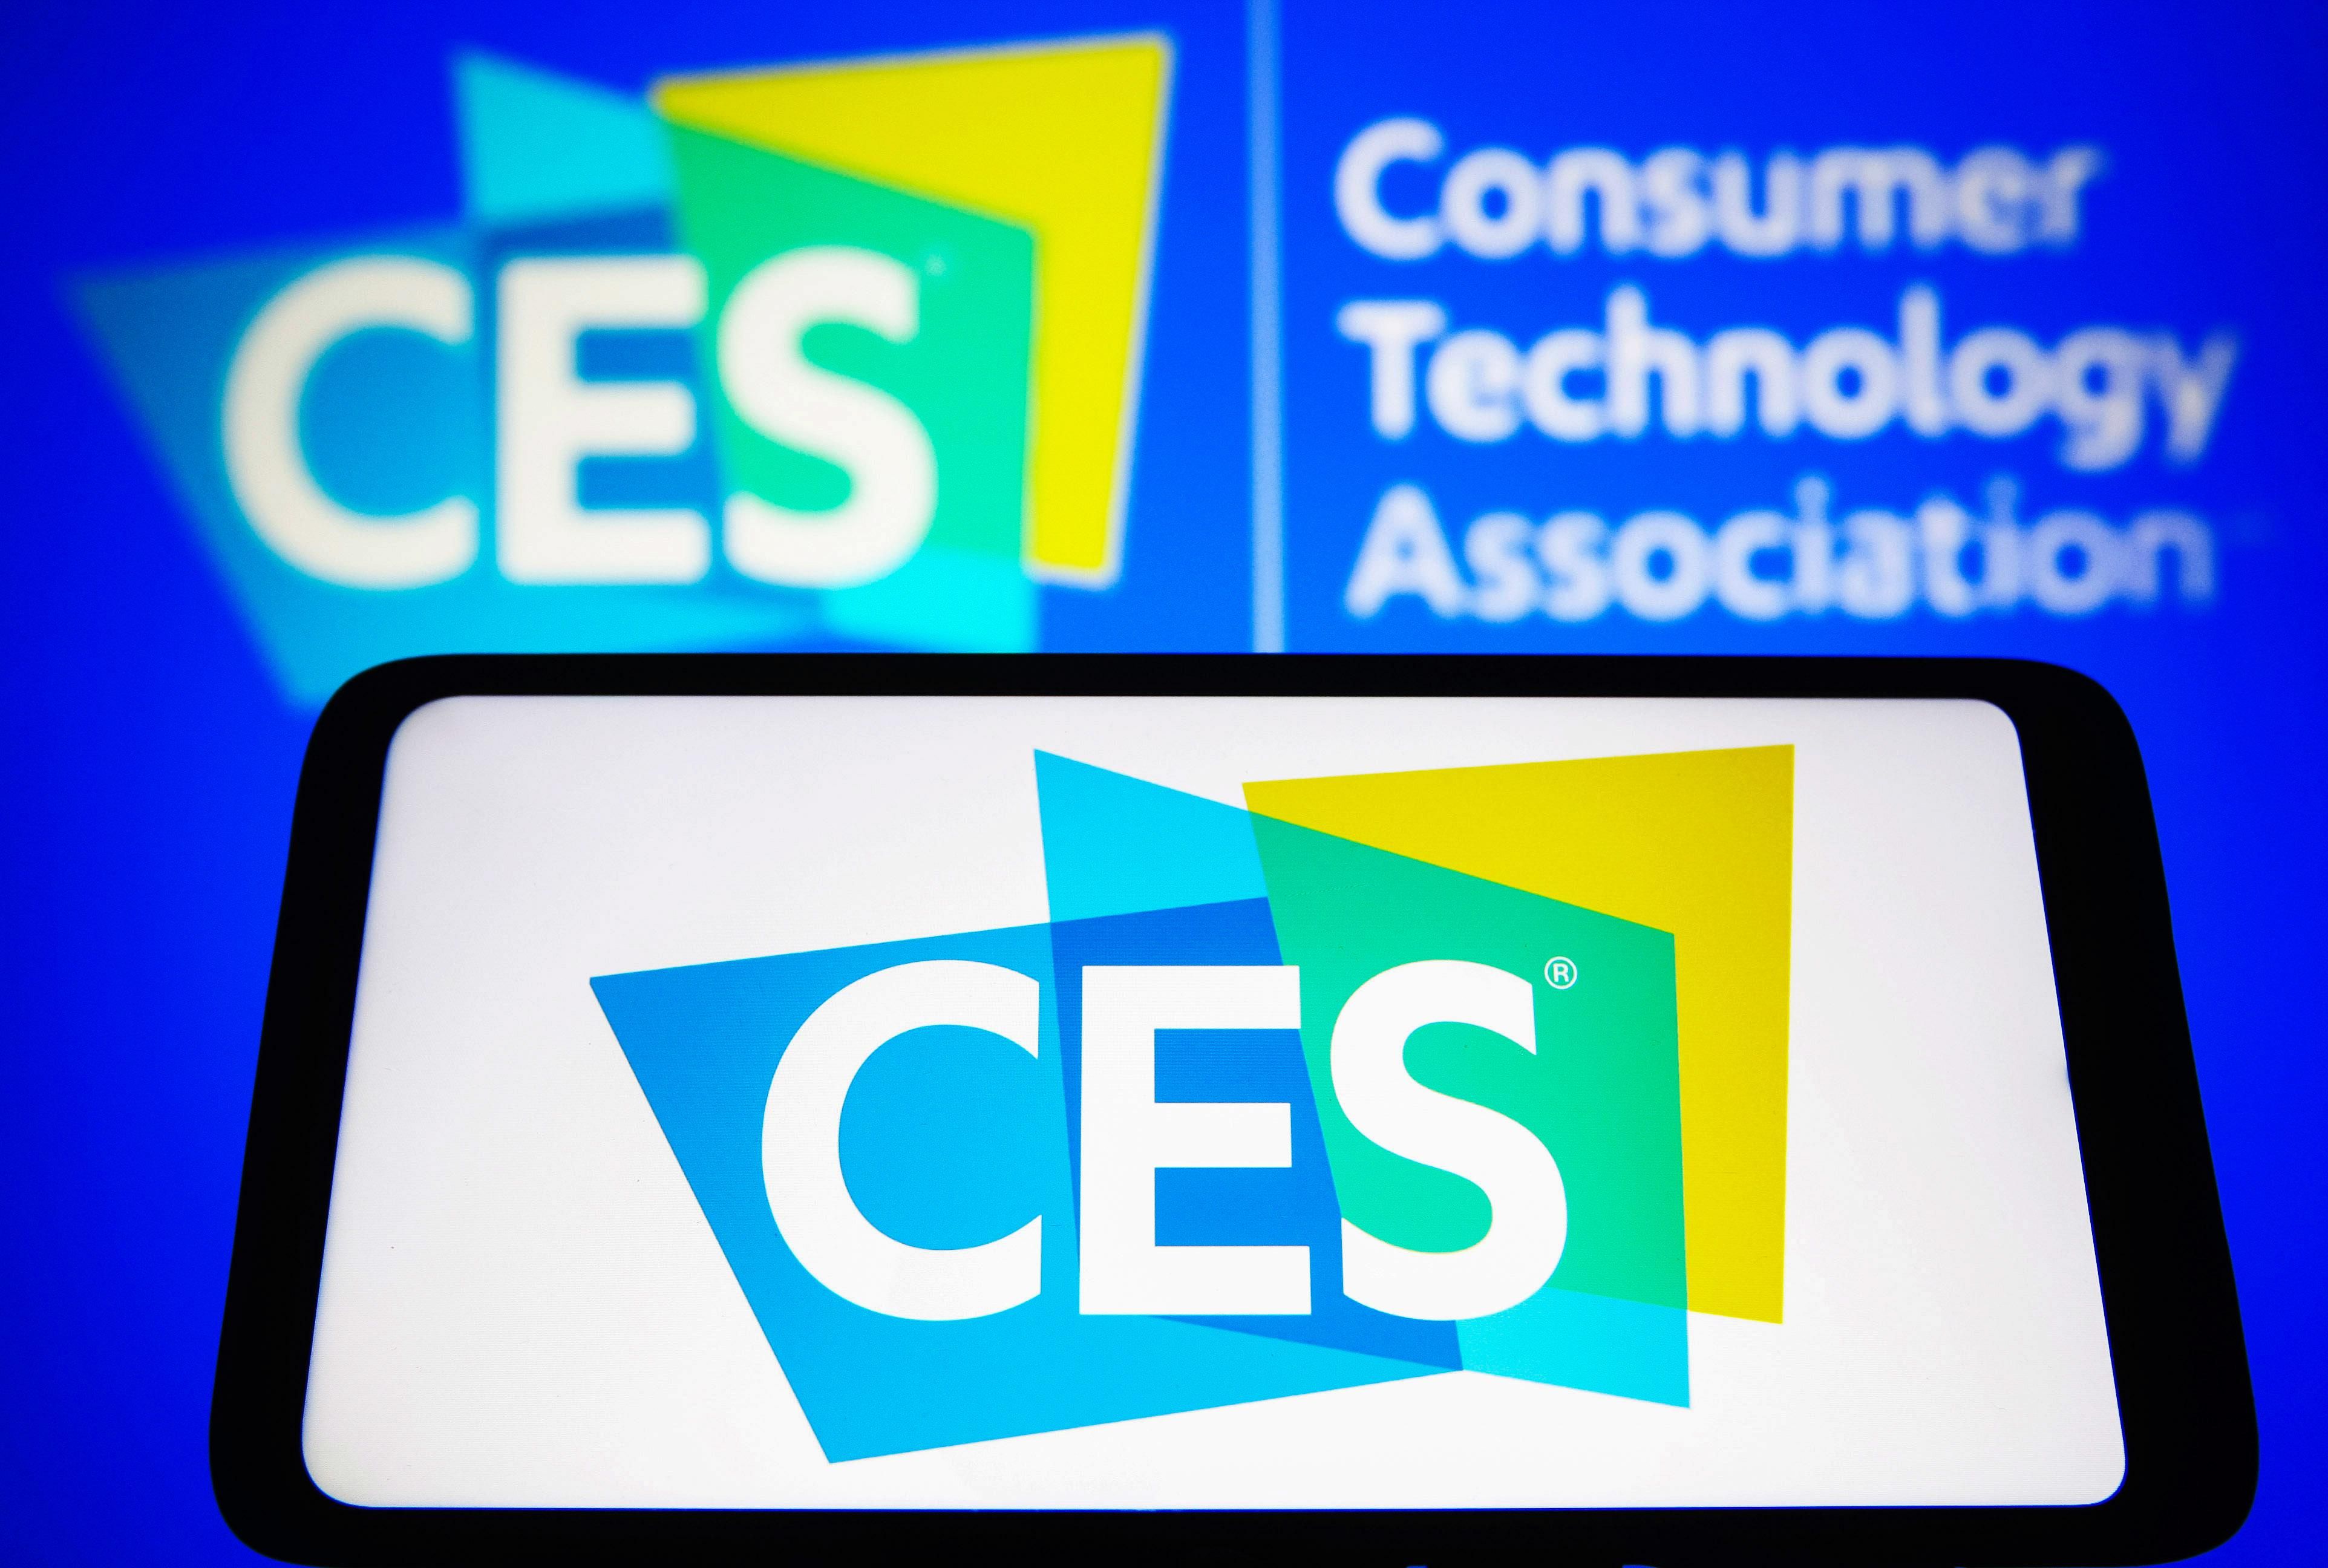 CES logo on a device and in the background